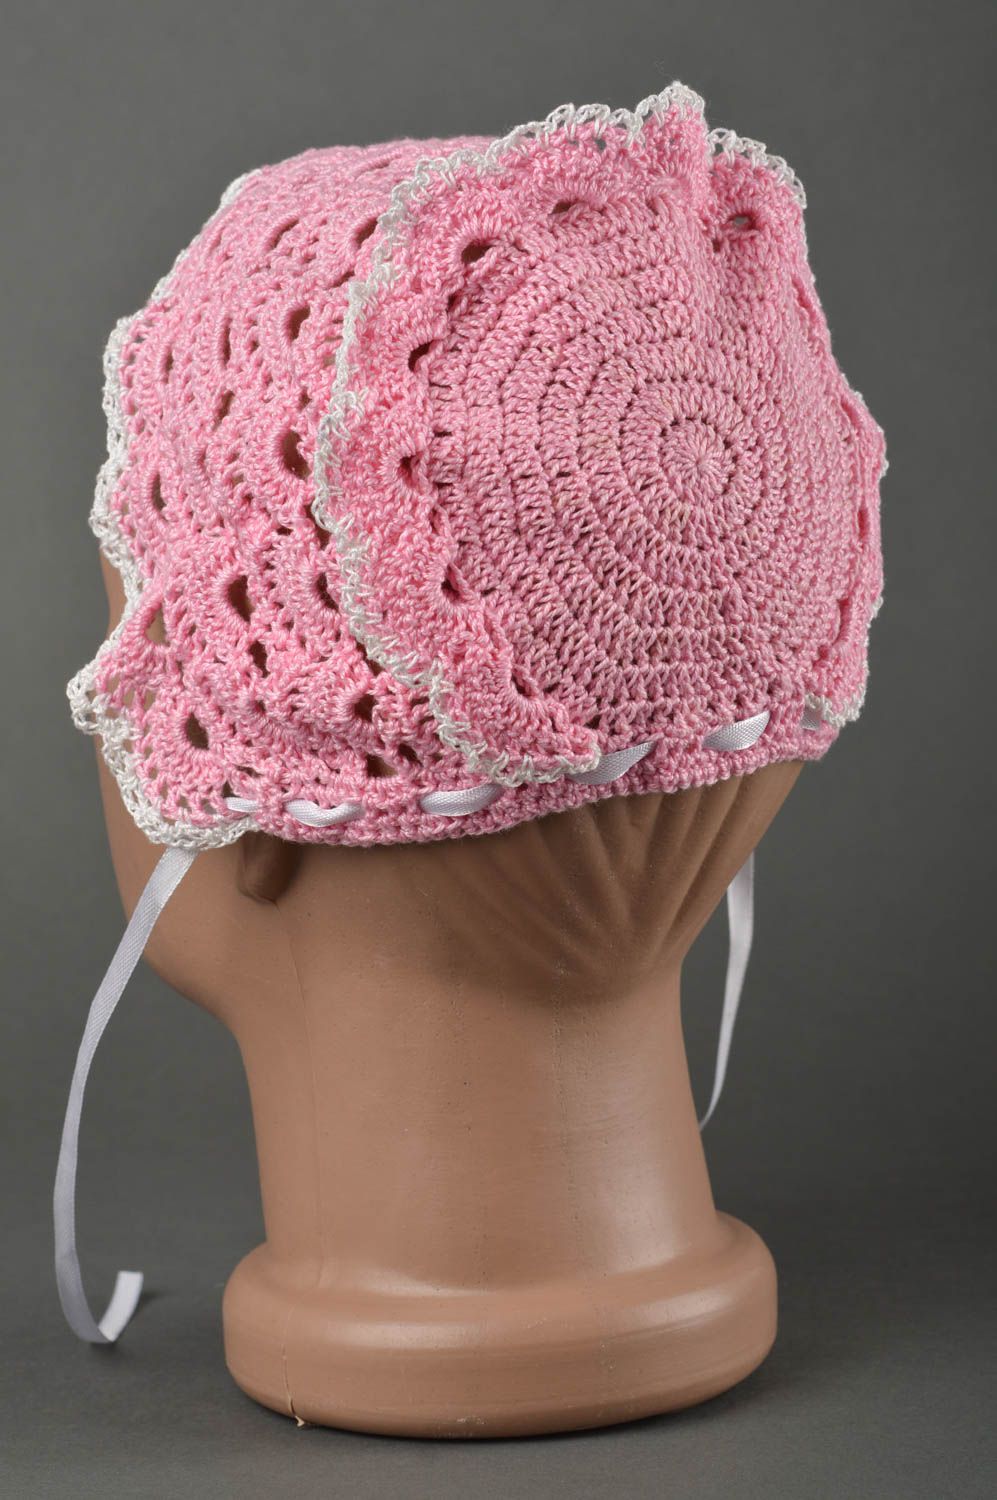 Handmade crochet baby hat summer hat lacy hat kids accessories gifts for girls photo 2